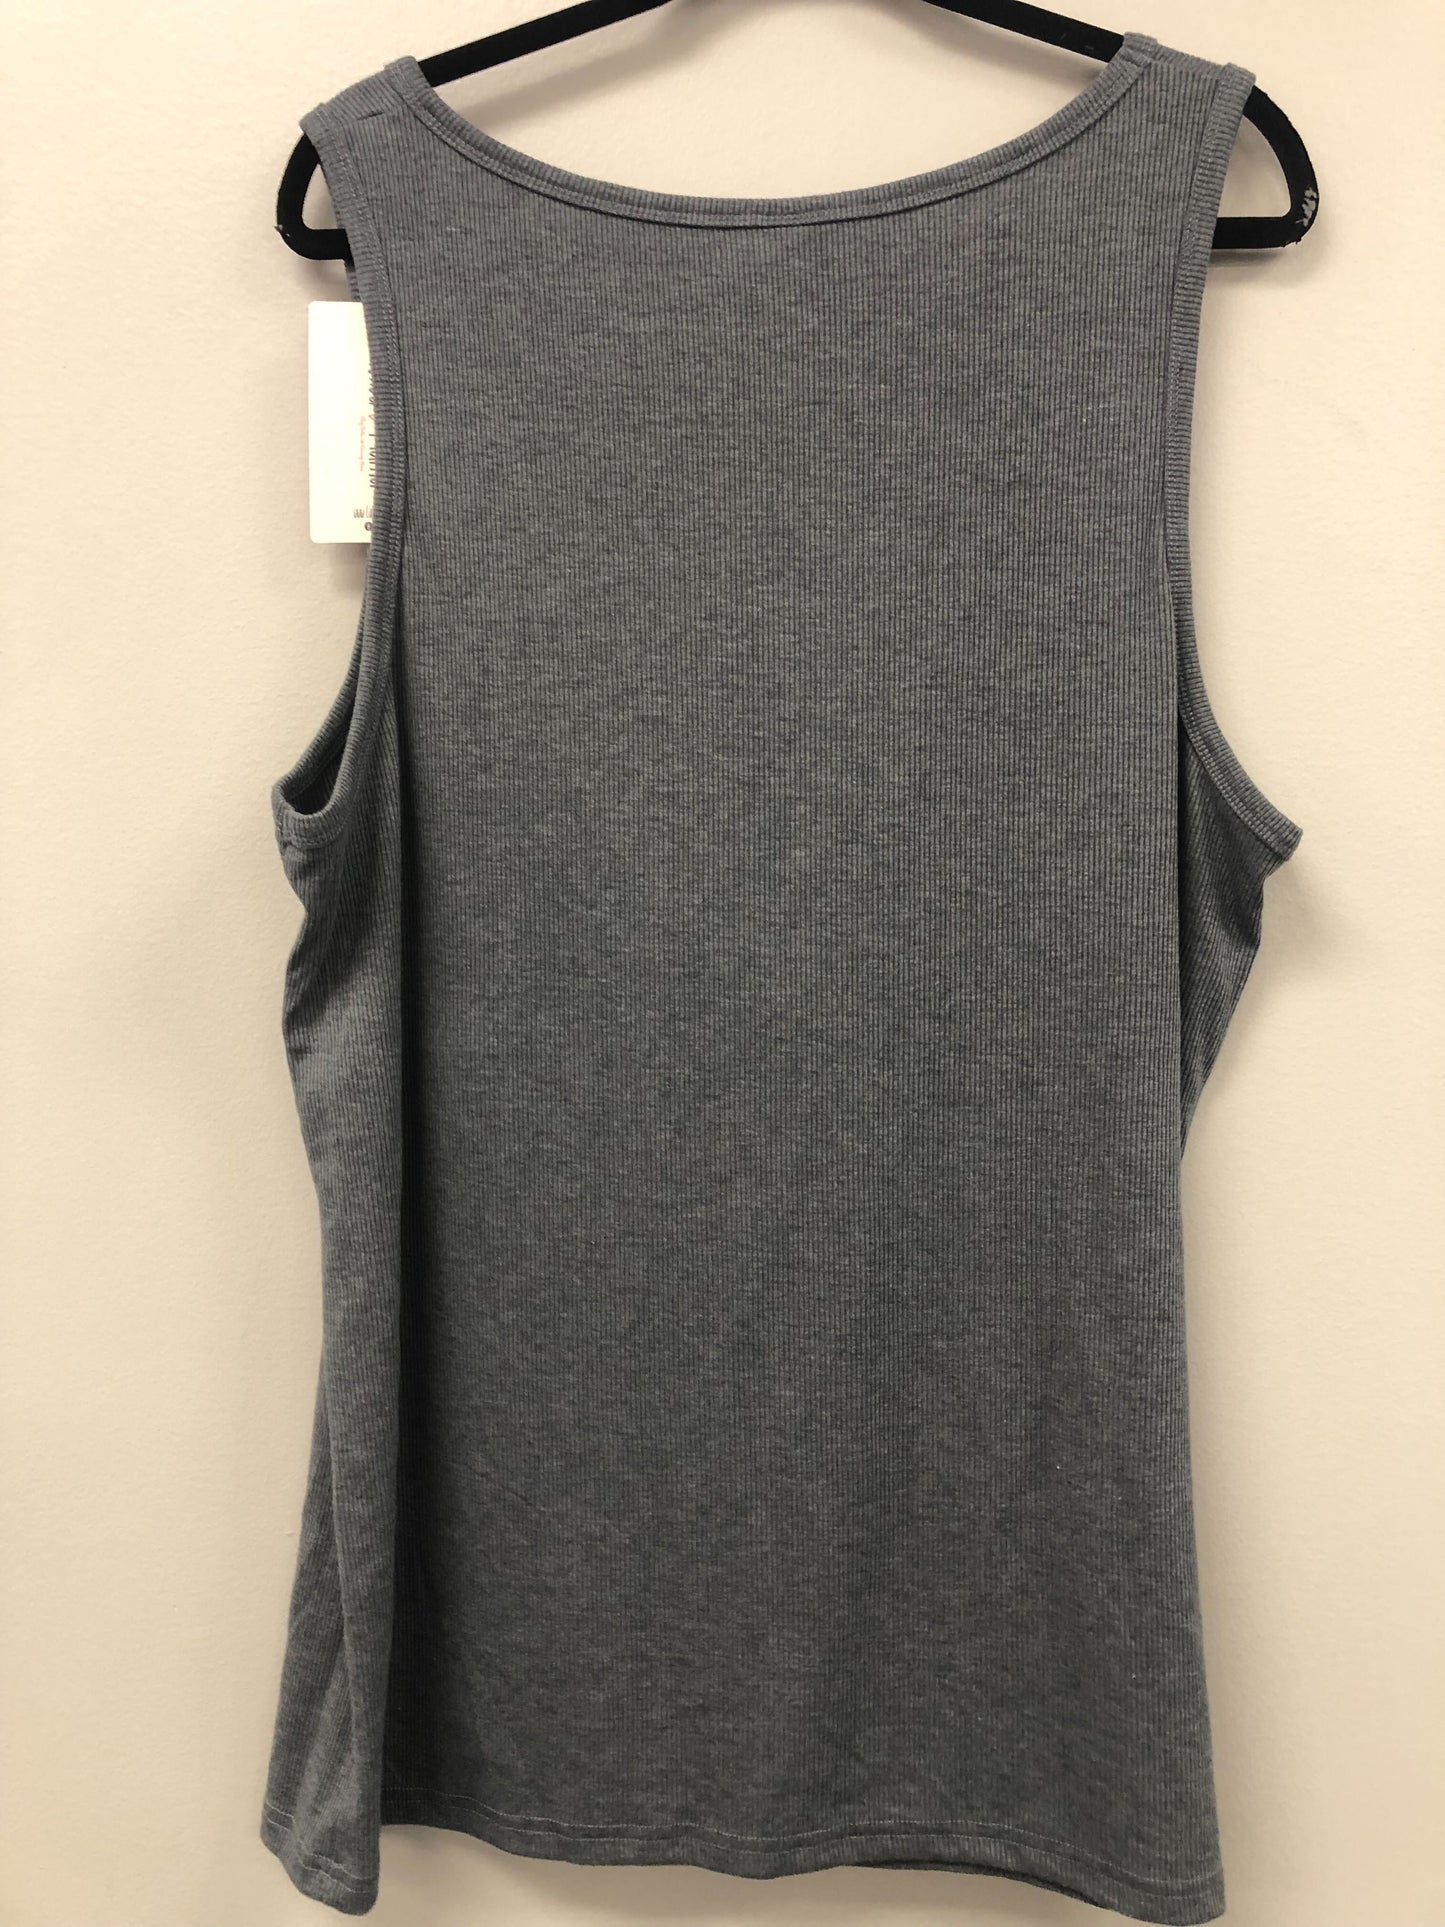 Outlet 5525 - Latched Mama Love Ribbed Nursing Tank - Grey - 1X